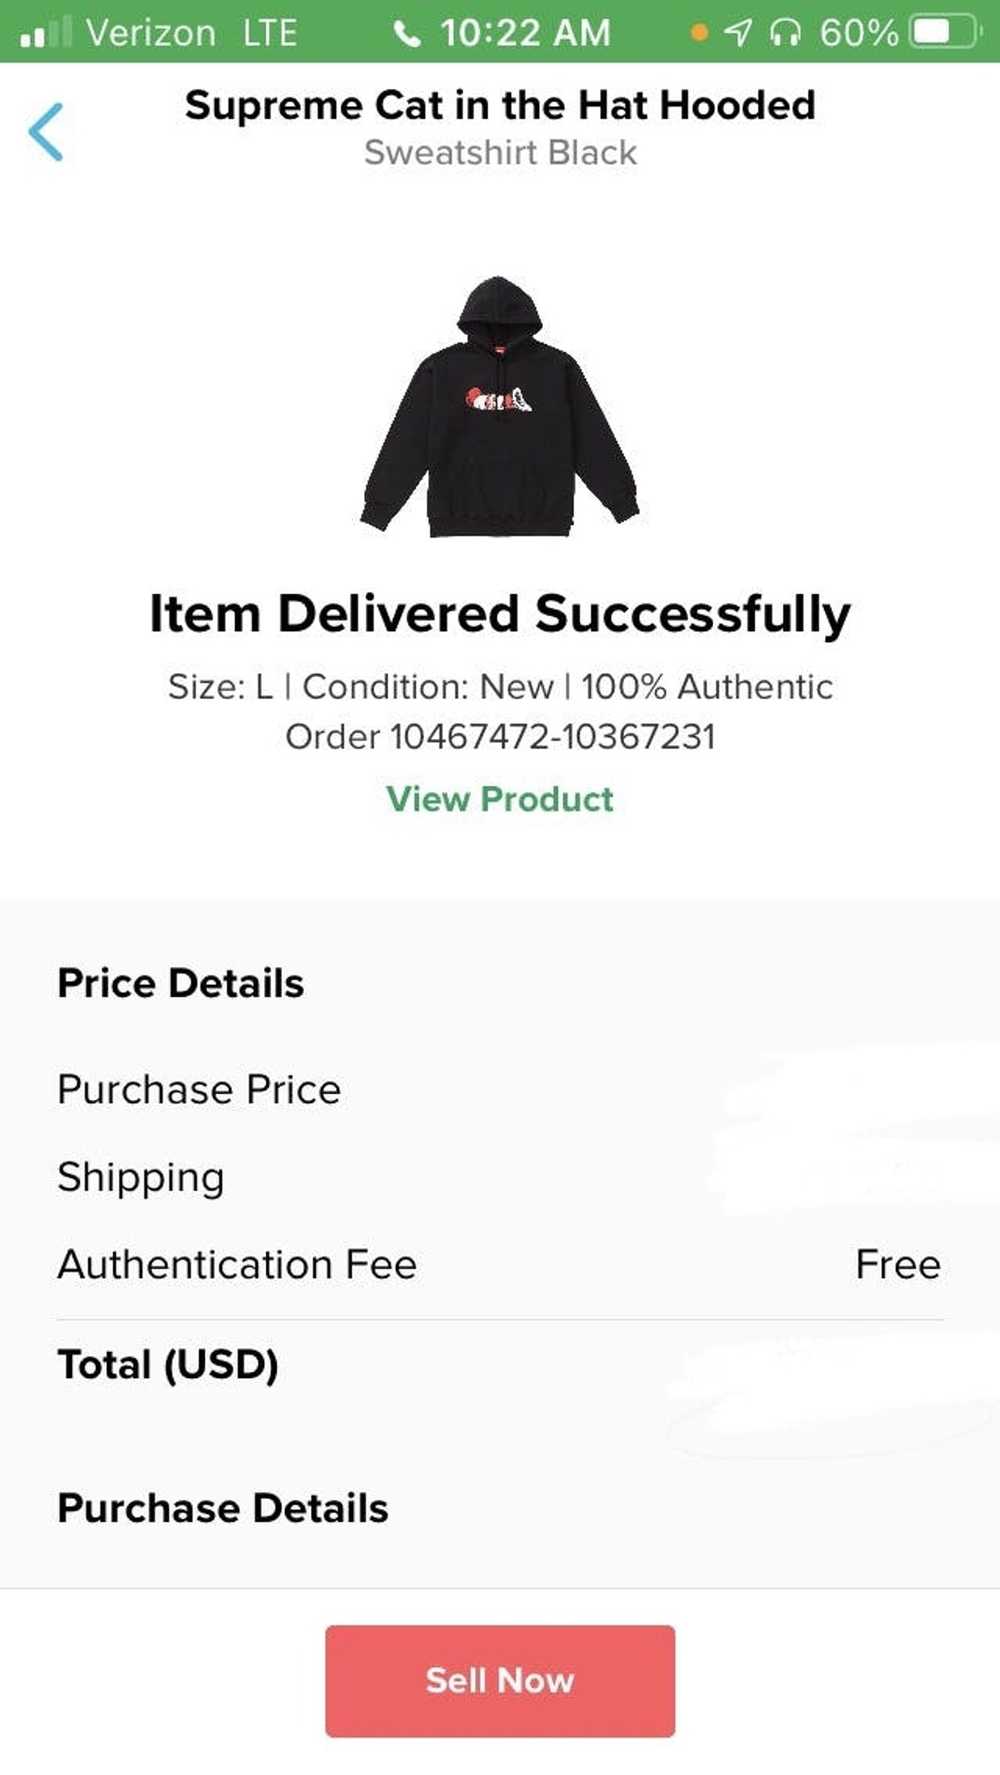 Supreme Cat in the Hat Hoodie - image 12